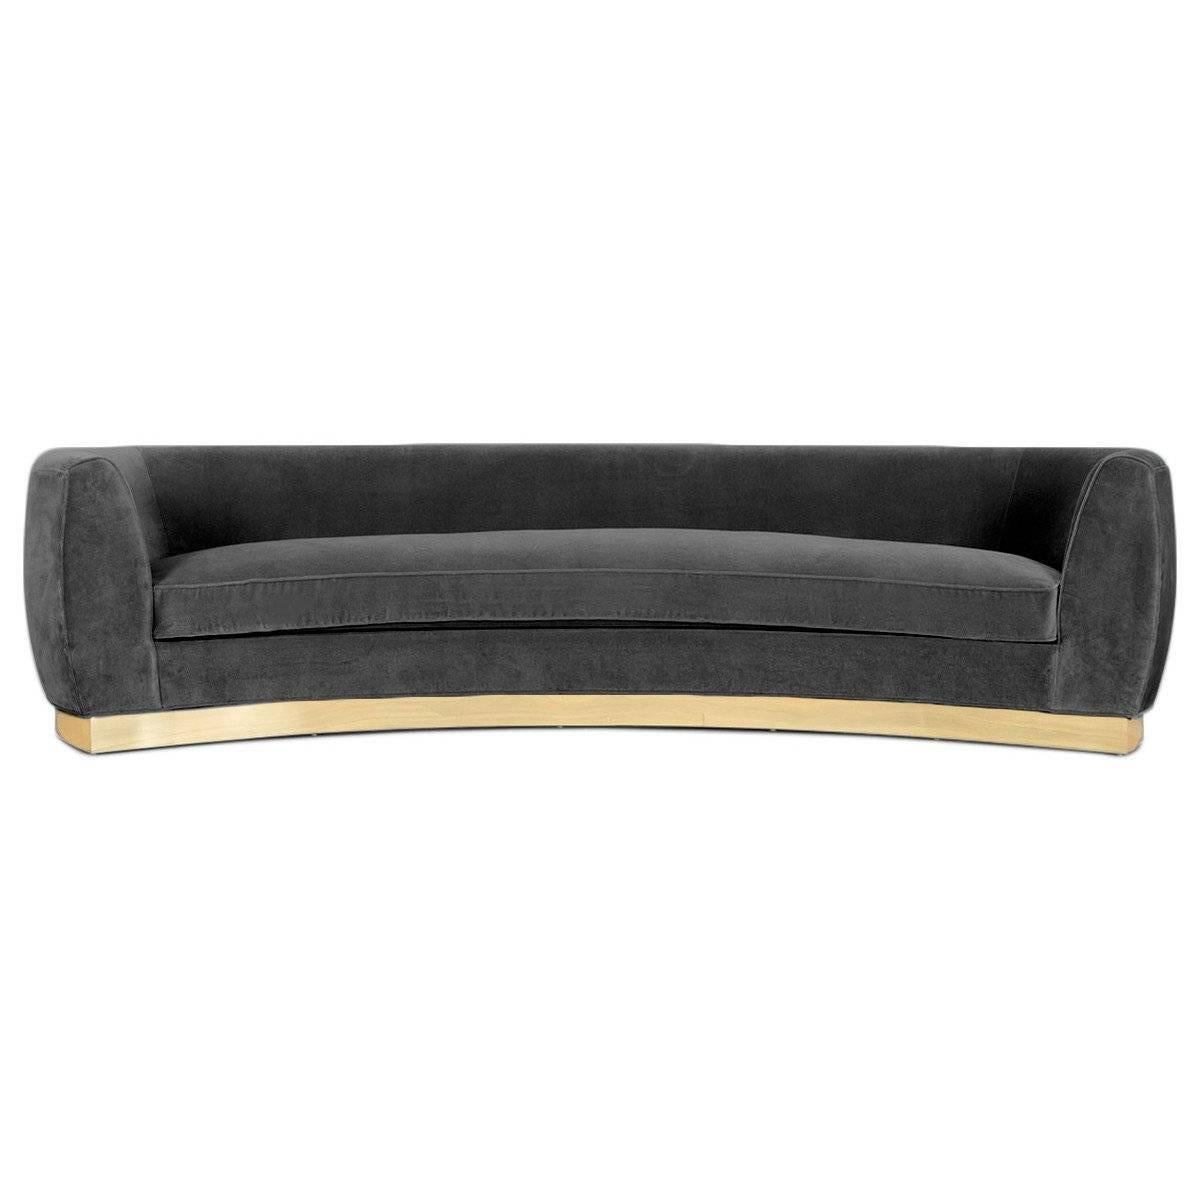 Art Deco Style Curved Sofa in Velvet Upholstery with Brass Toe-kick Base 10 foot For Sale 4